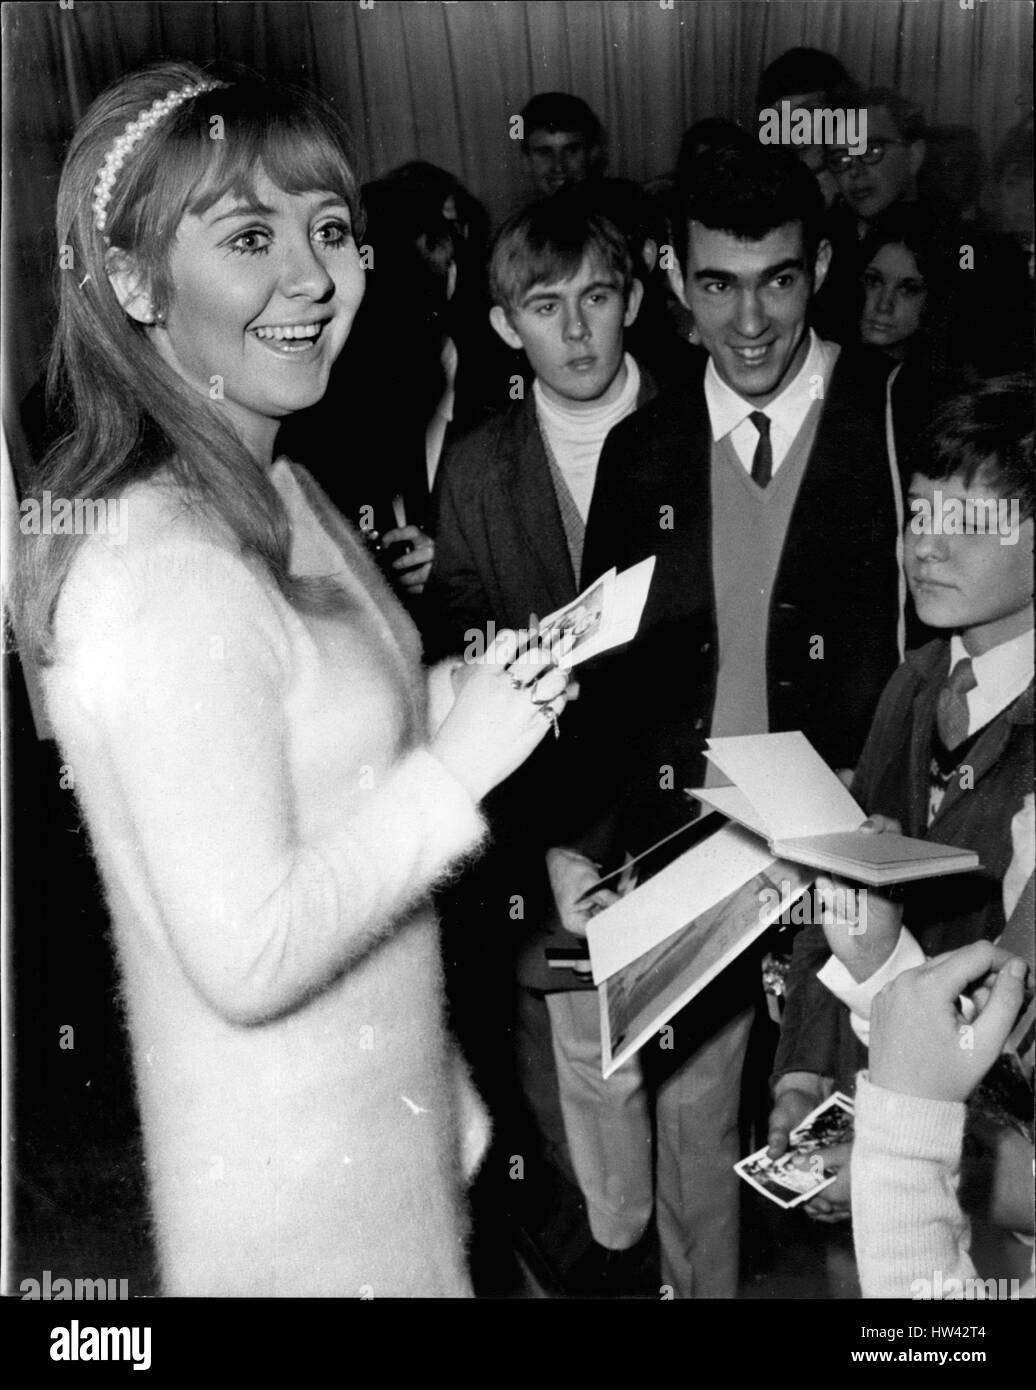 Dec. 12, 1968 - LULU - VOTED THE WORLD'S TOP FEMALE SINGER HOLDS A CHRISTMAS FOR 150 FANS LULU - who is to represent Britain in the Eurovision song contest - and recently voted the world's top female singer, today gave a Christmas party for 150 fans at Manchester Square, London W.L. PHOTO SHOWS: Lulu, the 20-year-old singer from Glaegow, signs autograph. for some of the fan. who attended today Christmas party, (Credit Image: © Keystone Press Agency/Keystone USA via ZUMAPRESS.com) Stock Photo